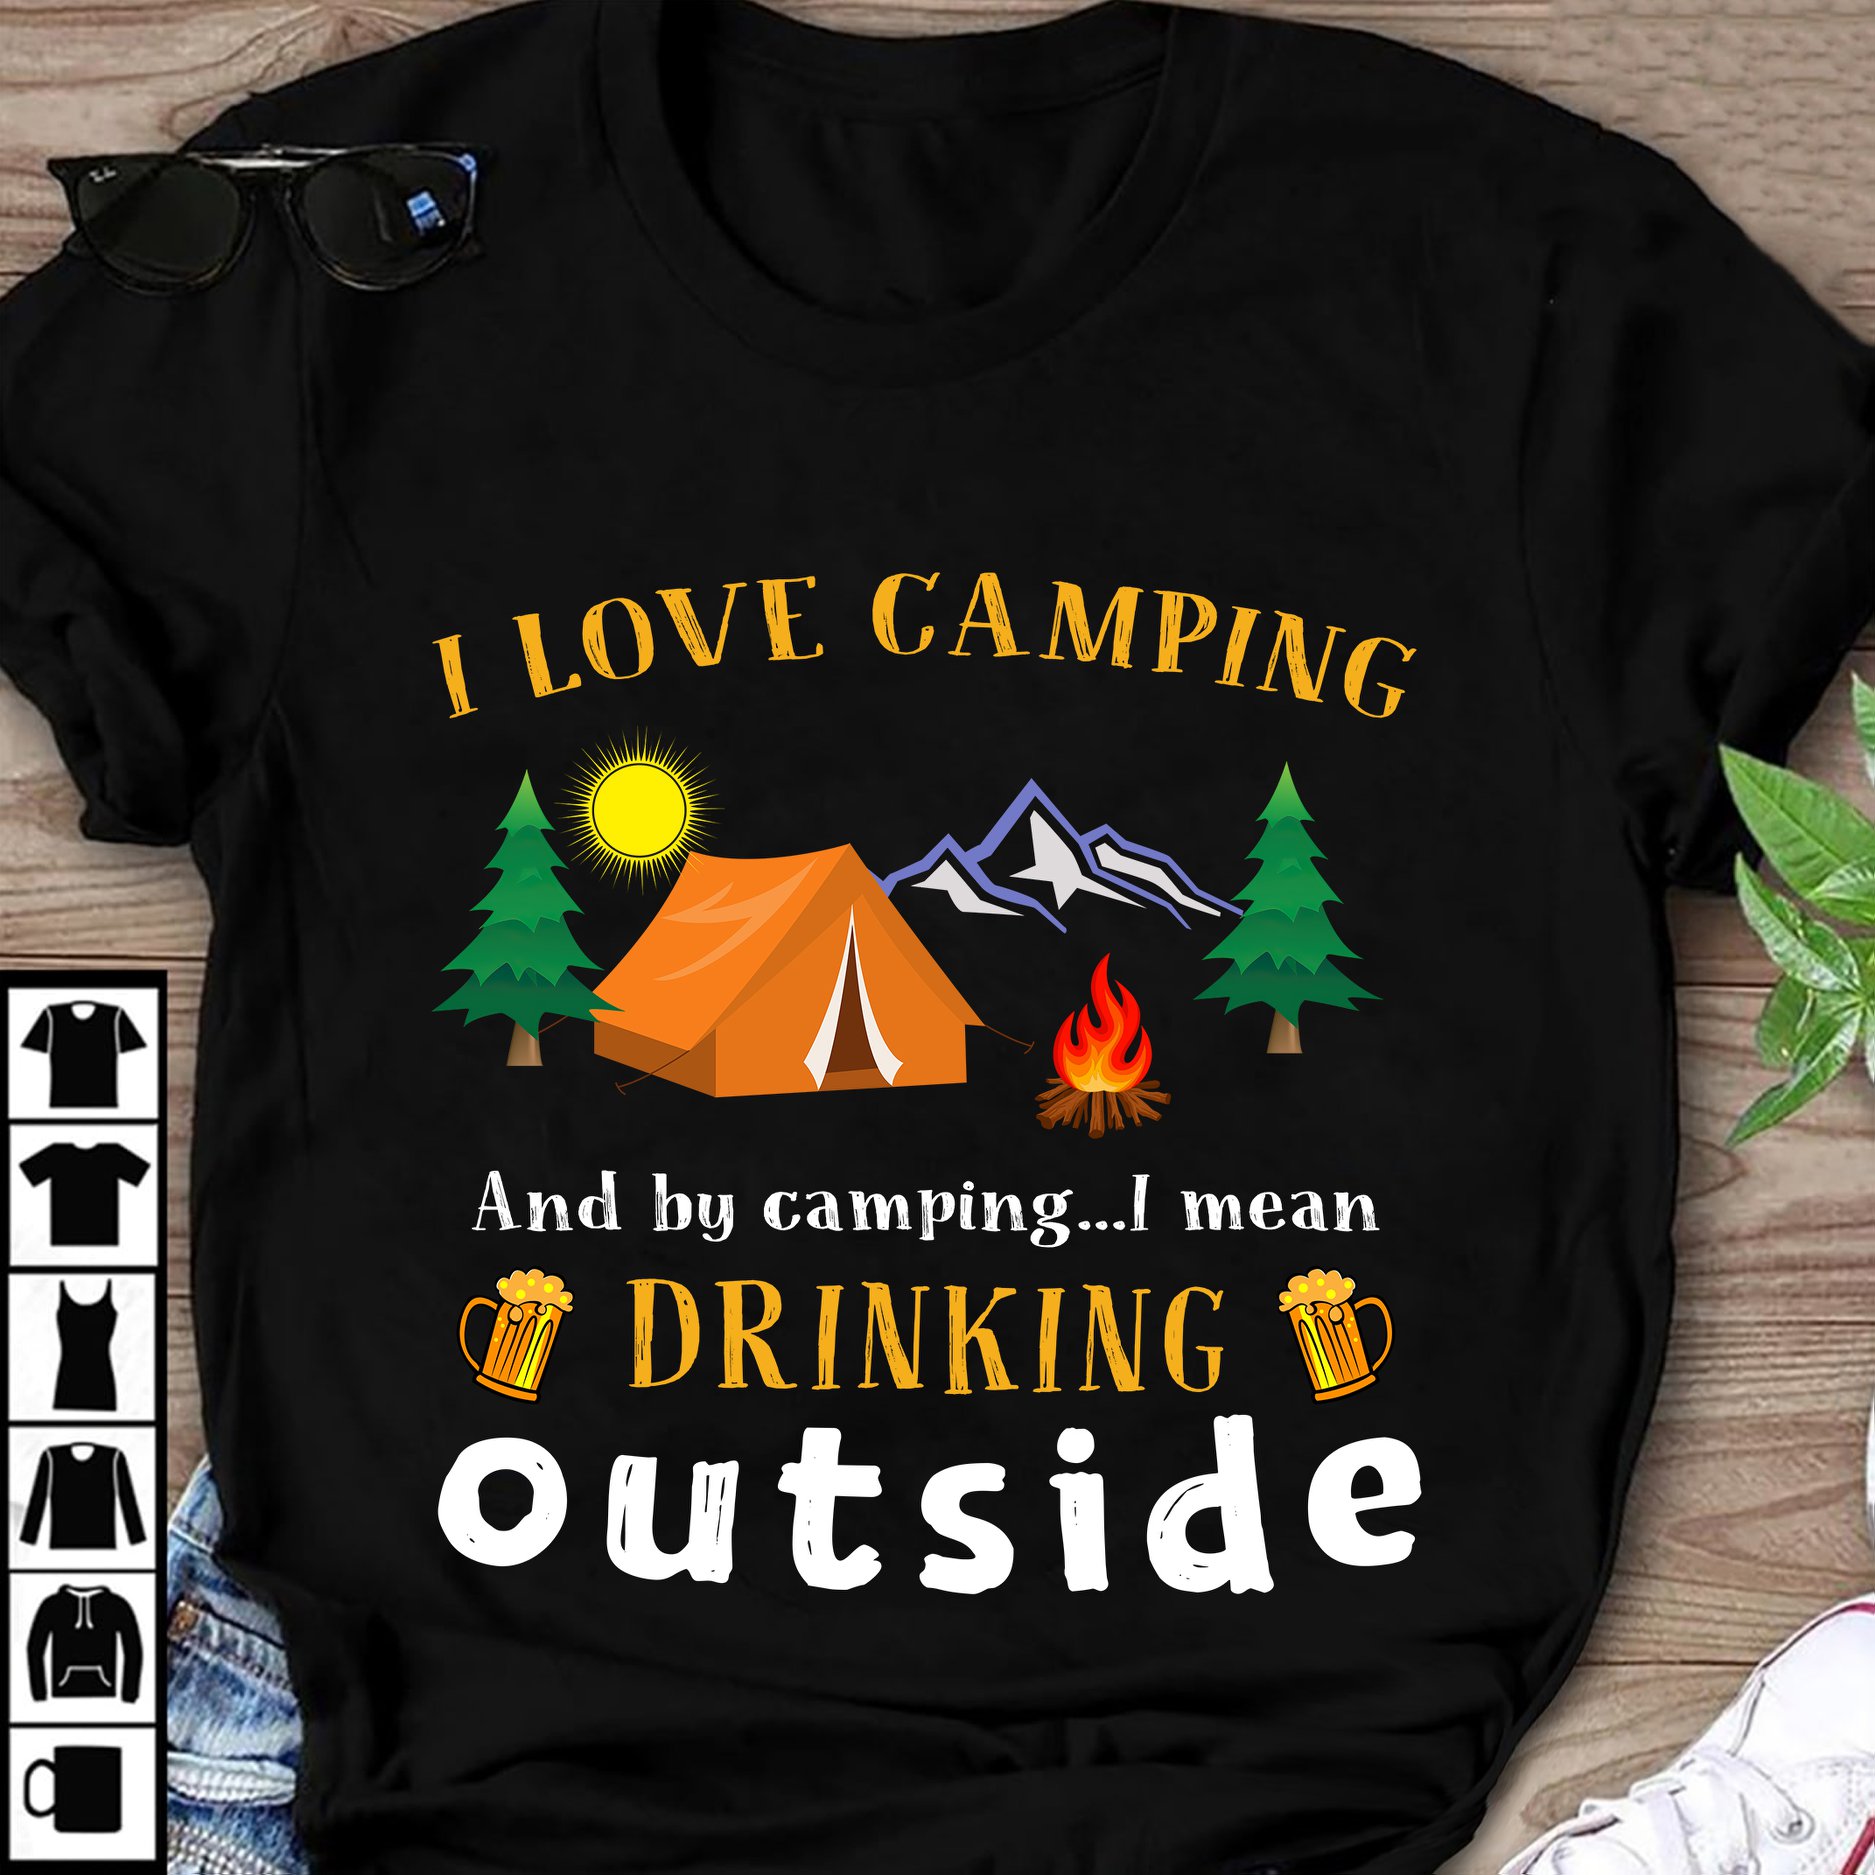 I love camping and by camping I mean drinking outside - Love camping and drinking